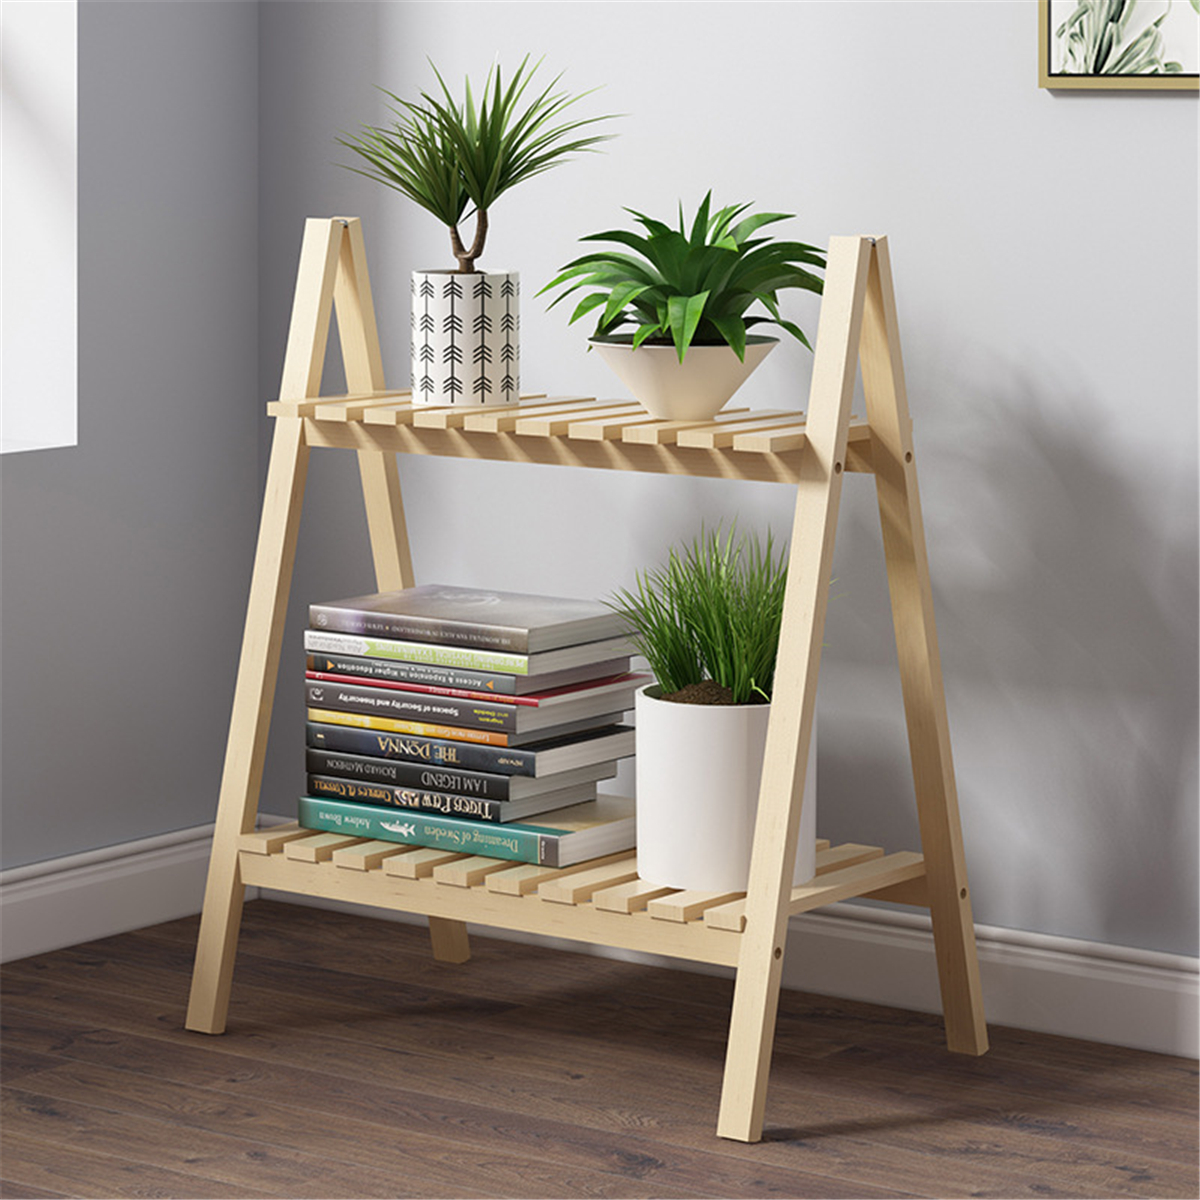 2-Layers-Flower-Racks-Foldable-Wood-Plant-Stand-A-shape-Indoor-Landing-Shelf-for-Home-Balcony-1766531-5